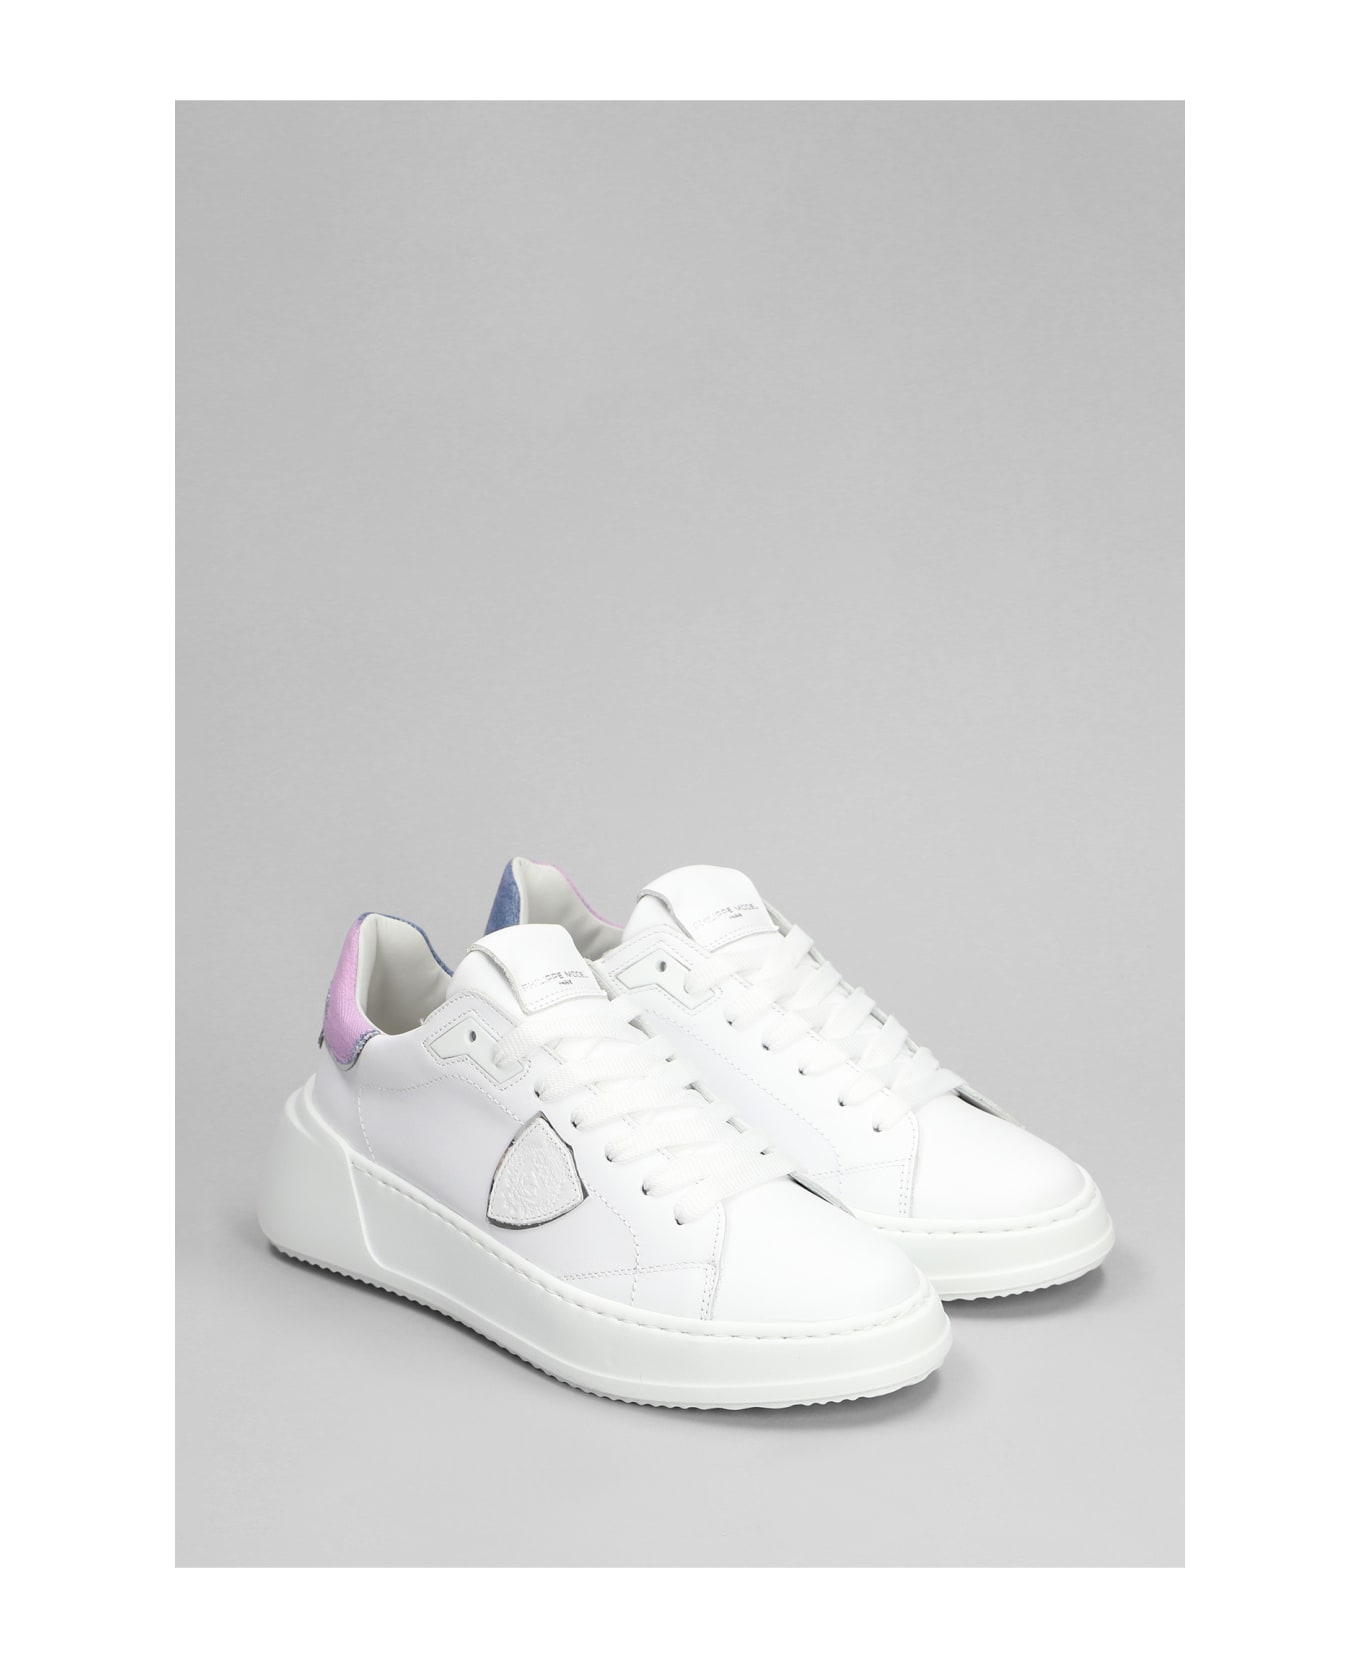 Philippe Model Tres Temple Low Sneakers In White Leather - white スニーカー